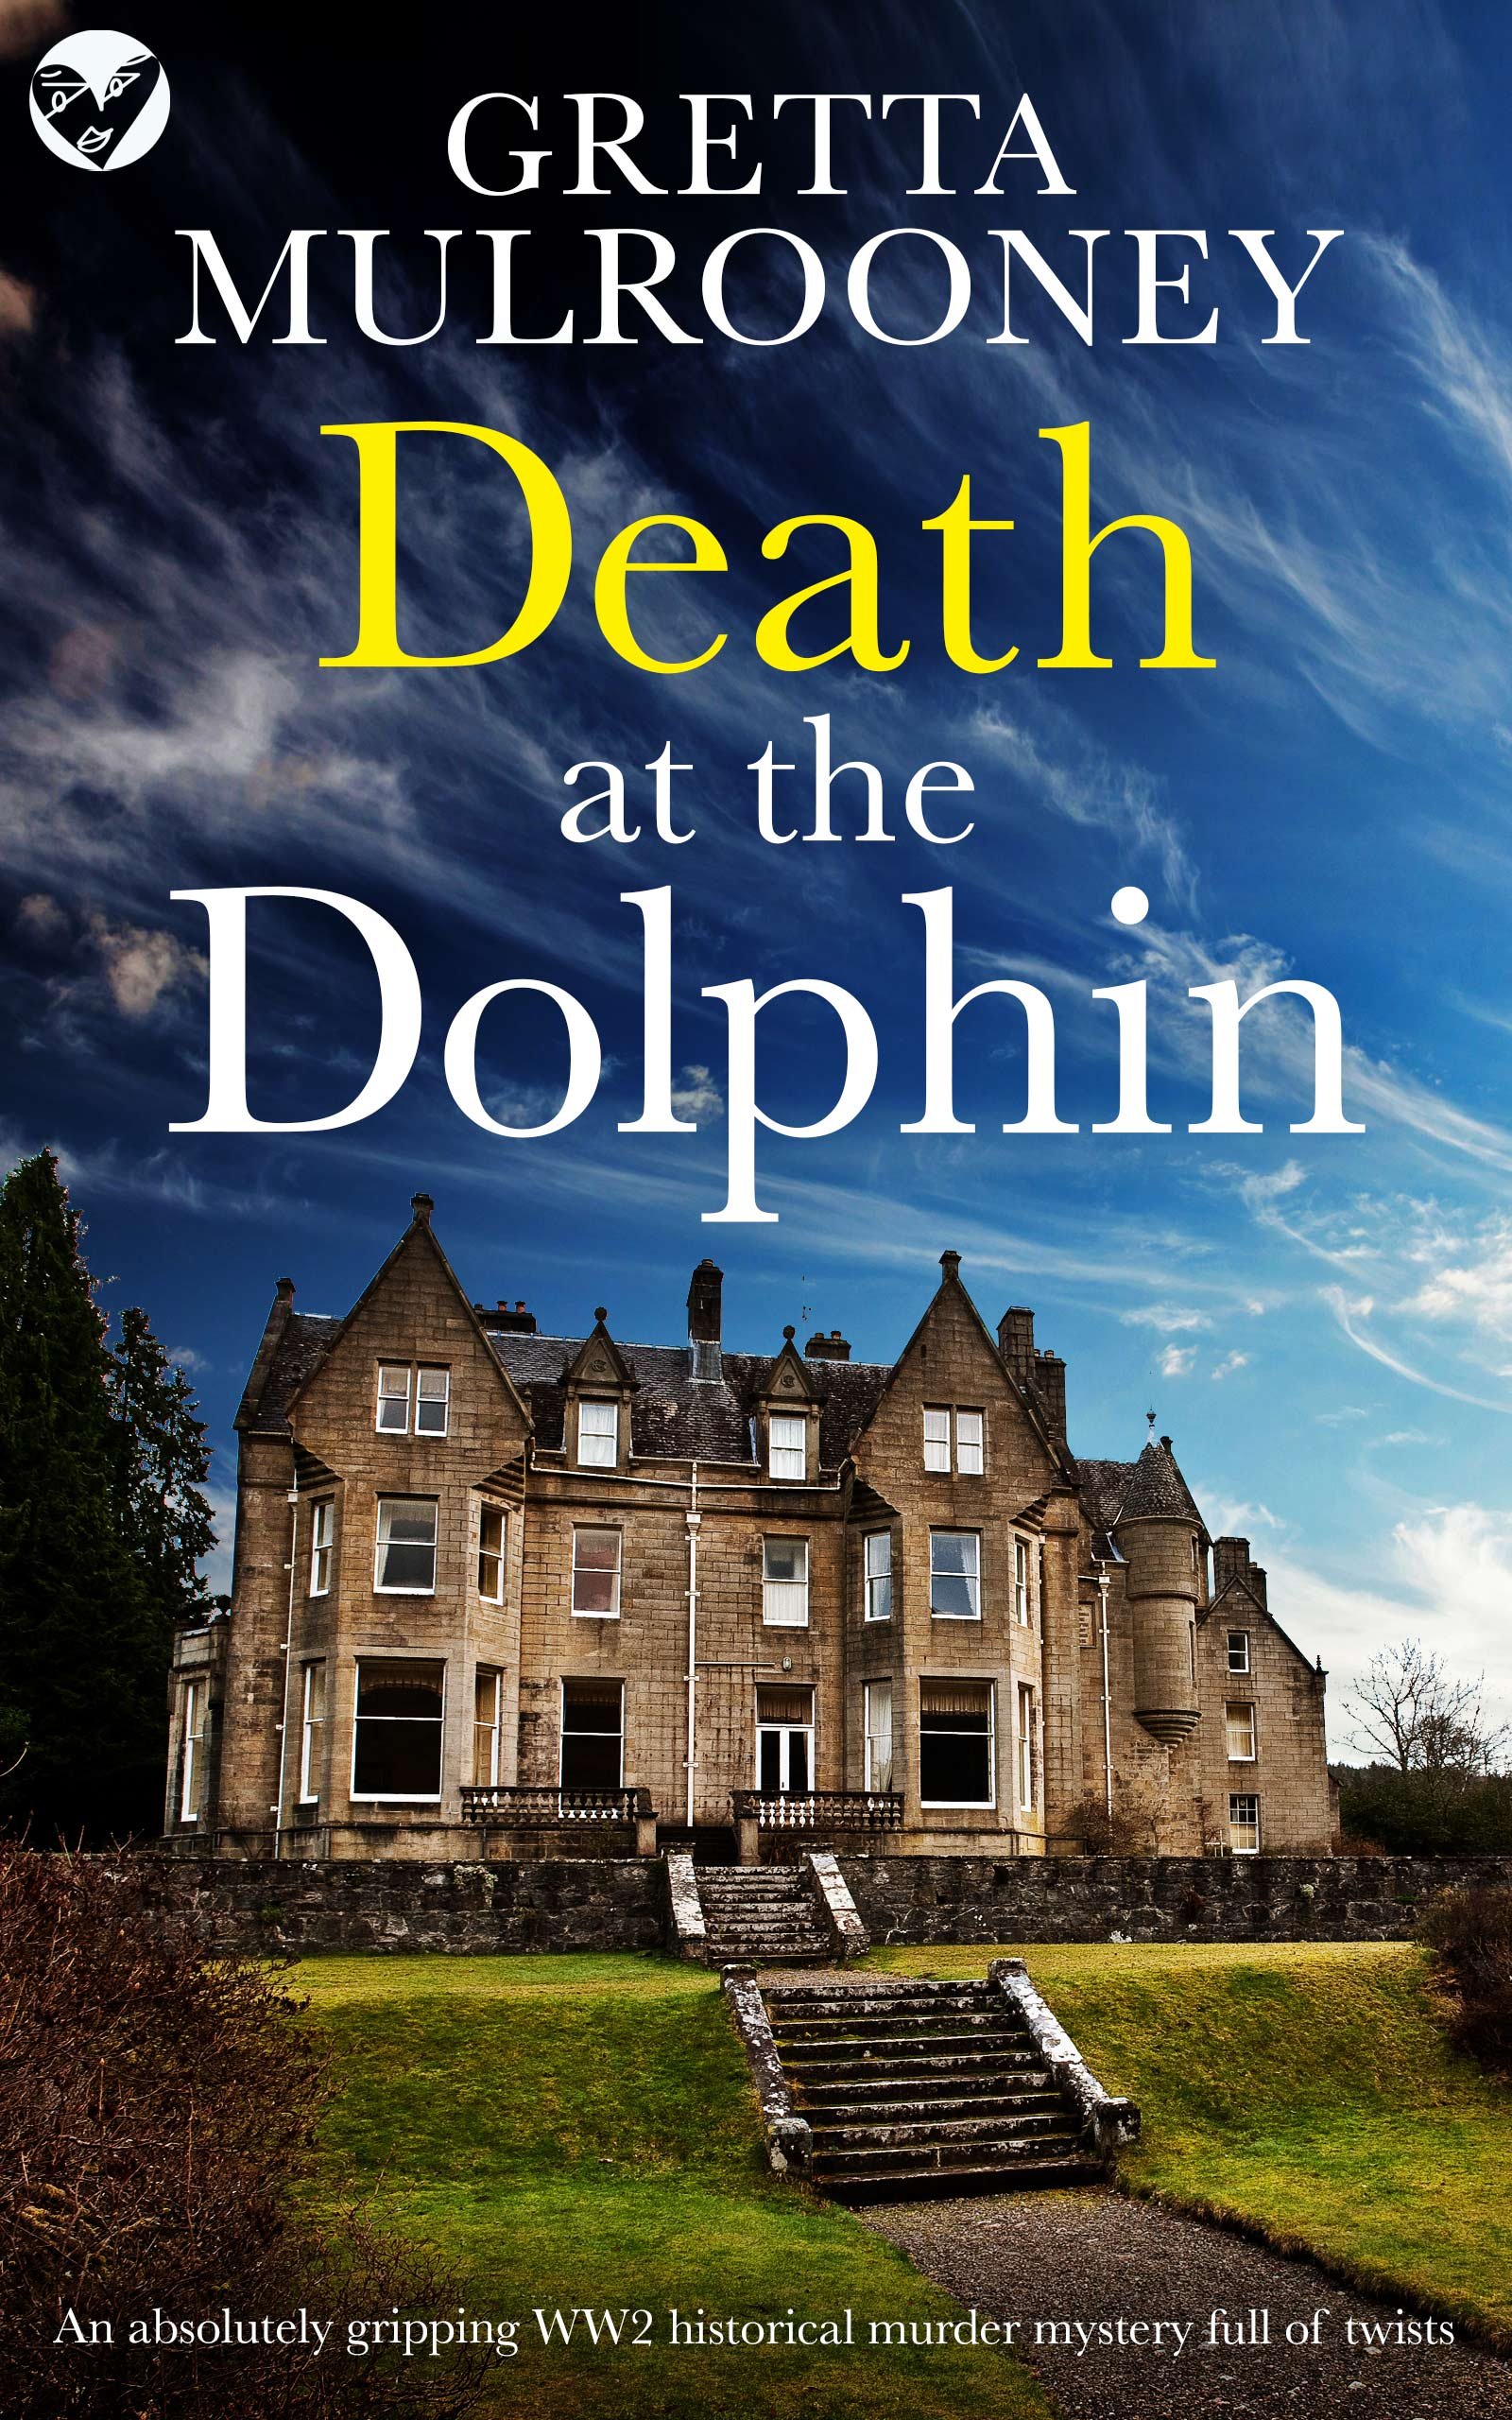 DEATH AT THE DOLPHIN Publish Cover New 644KB (1).jpg